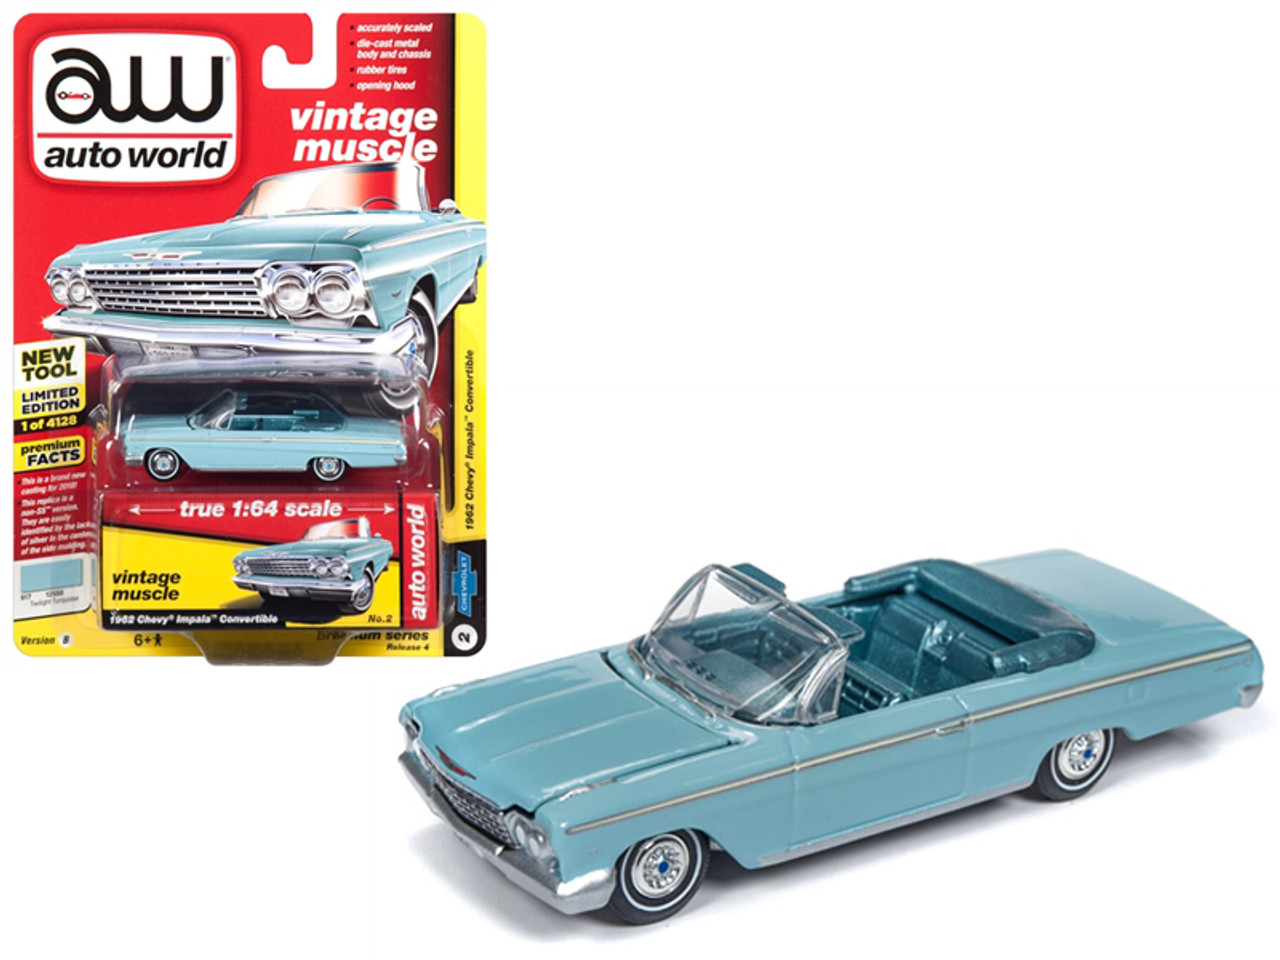 1962 Chevrolet Impala Open Convertible Twilight Turquoise with Light Teal Interior "Vintage Muscle" Limited Edition to 4128 pieces Worldwide 1/64 Diecast Model Car by Autoworld